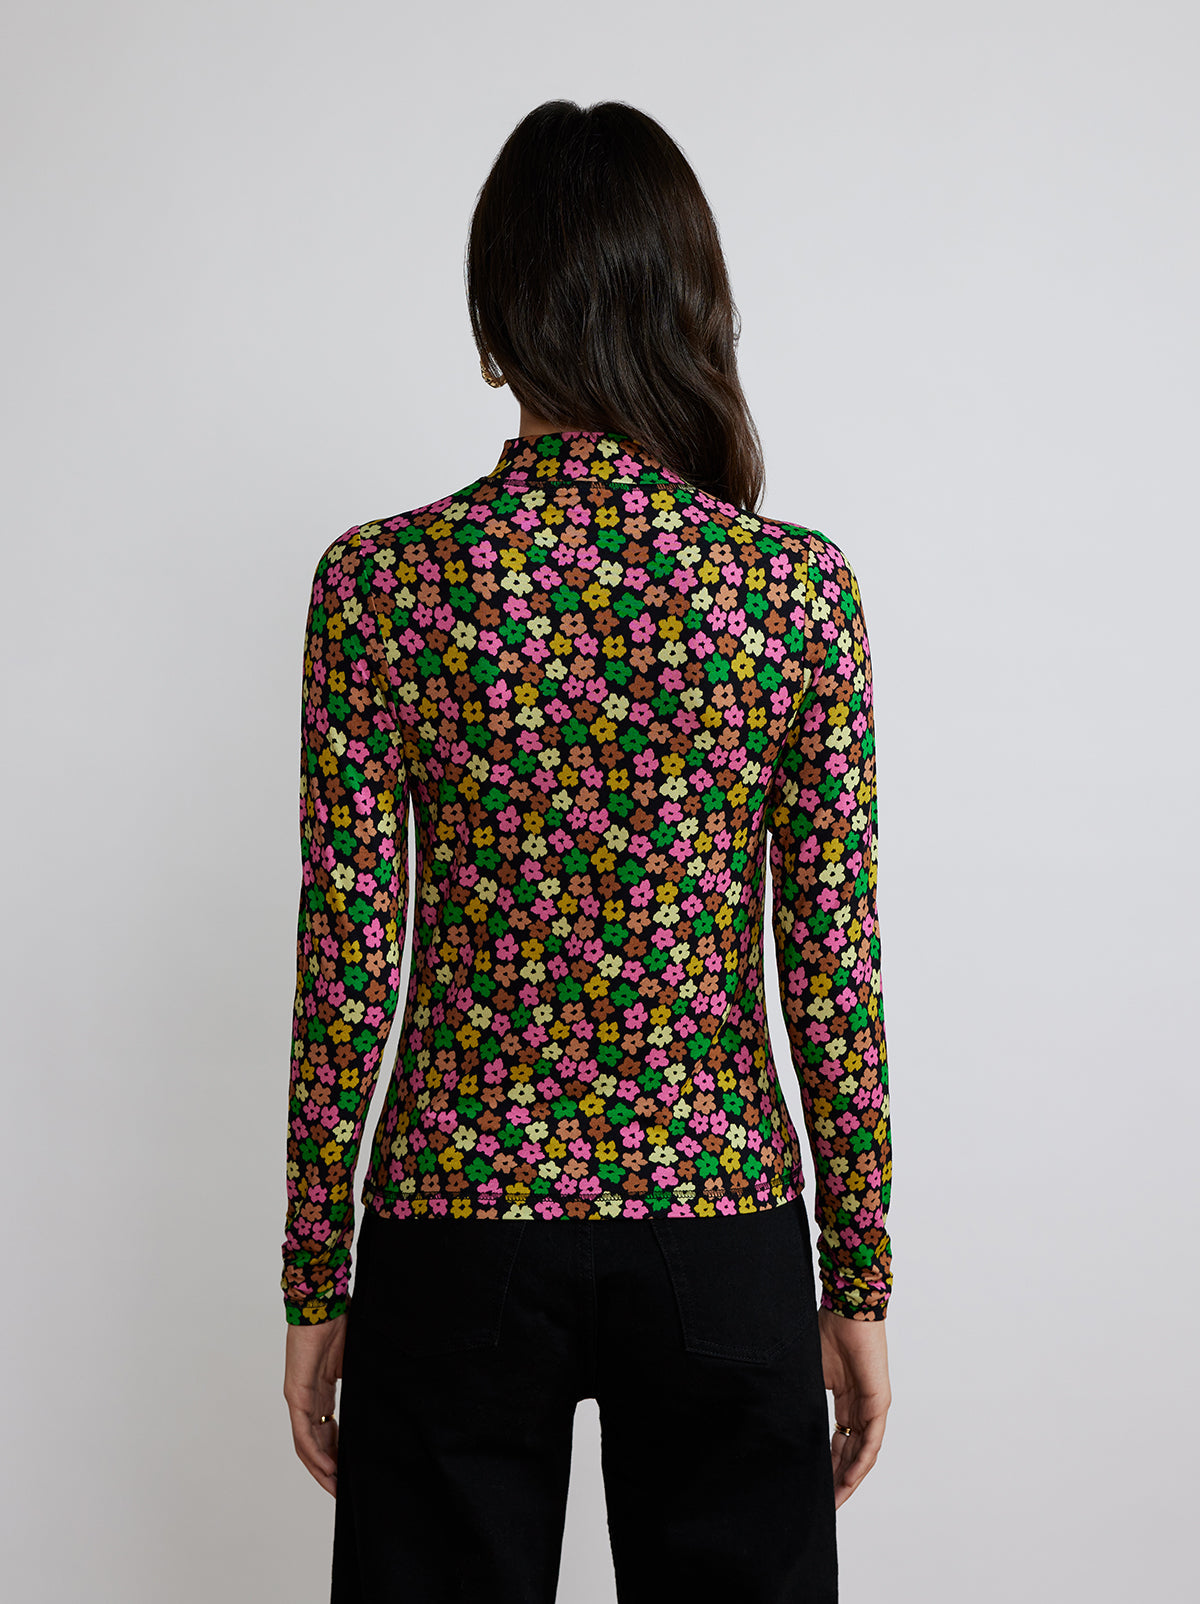 Paige Multi Floral Jersey Top By KITRI Studio